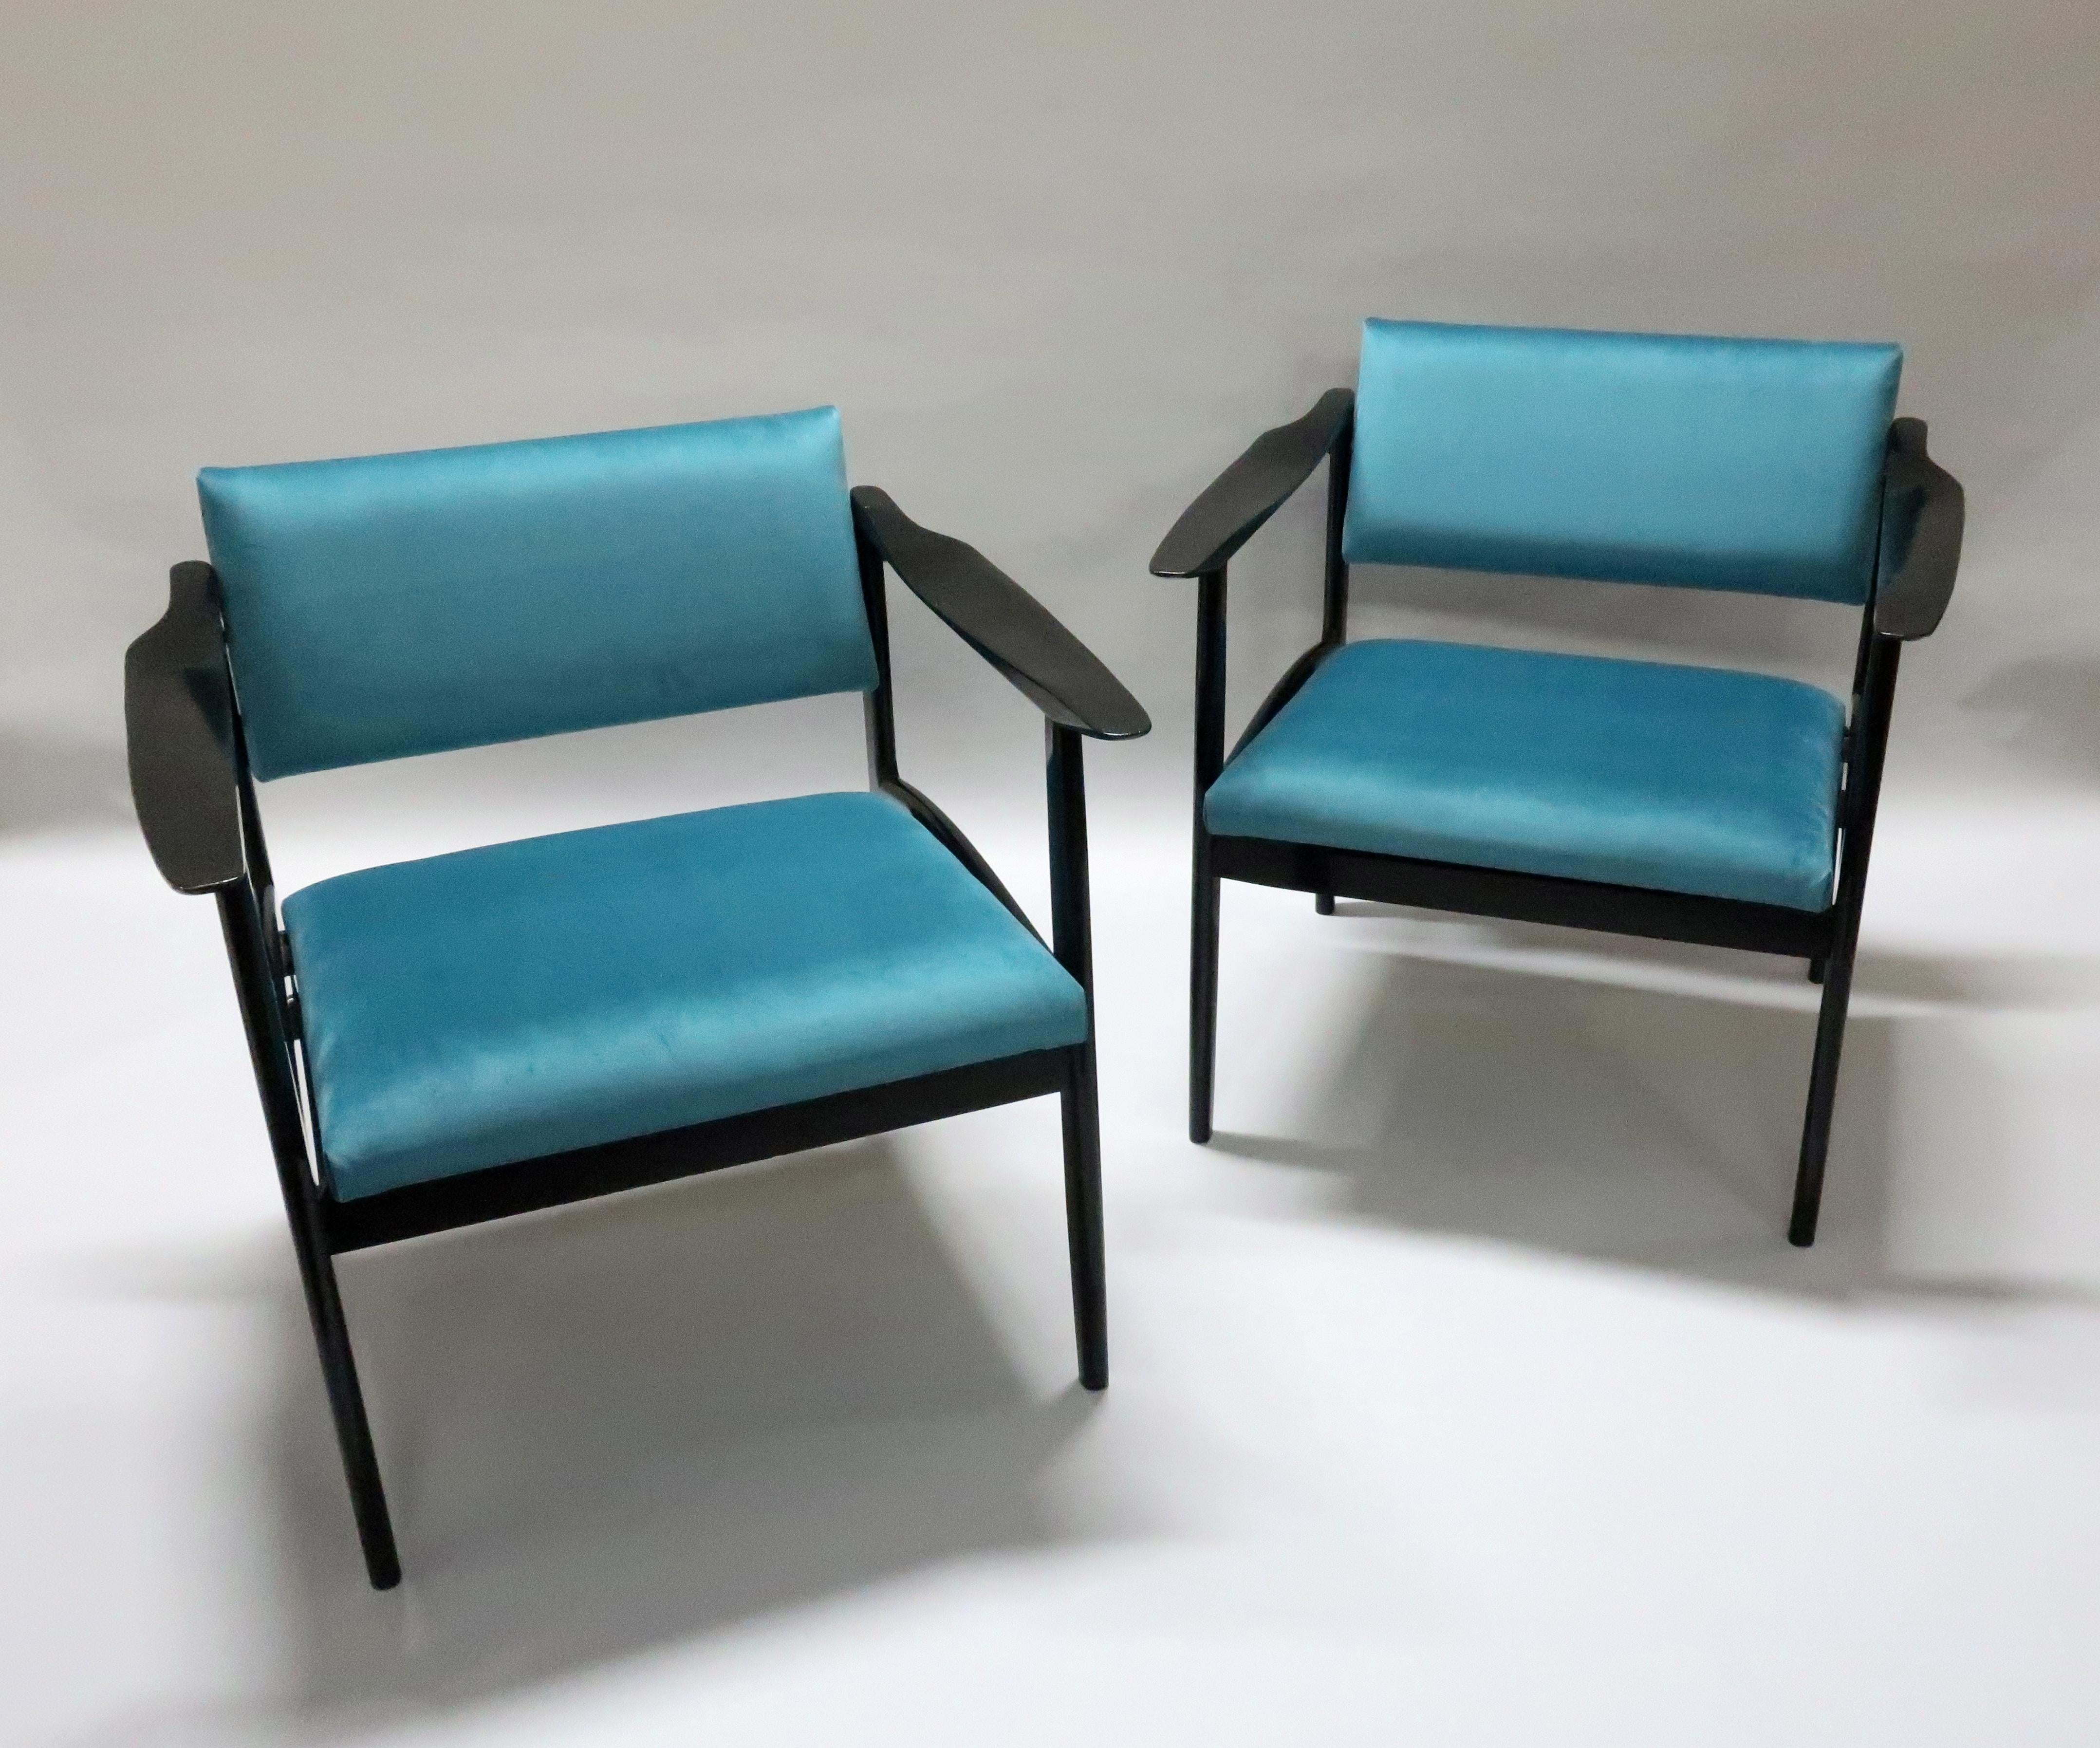 A very stylish pair of Italian ebonized Mid-Century Modern armchairs with sleek propeller shaped arms and pivot backs which adjust to your seating position. The chairs have been re-upholstered in a teal colored velvet.